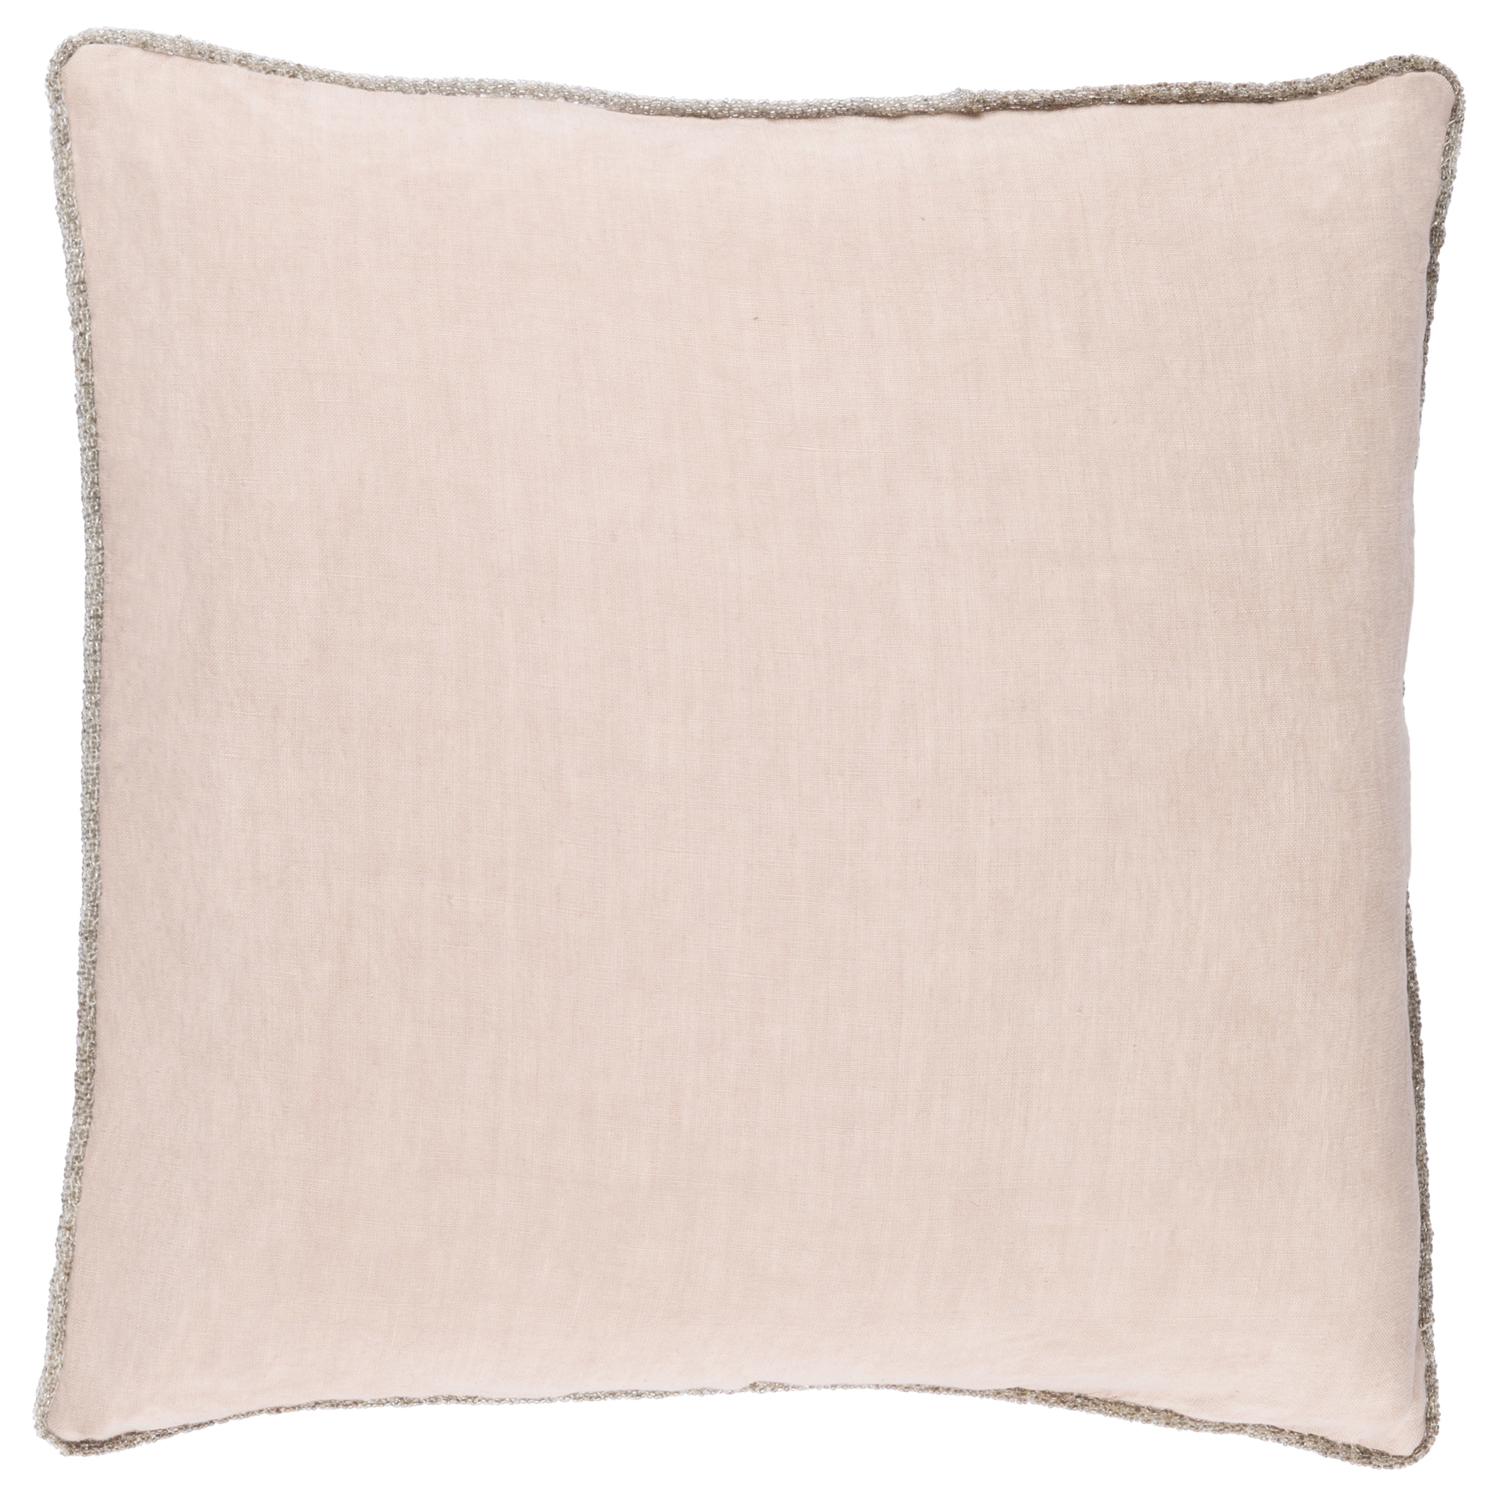 Pillows + Throws + Rugs, Pale Pink Madeline Pillow